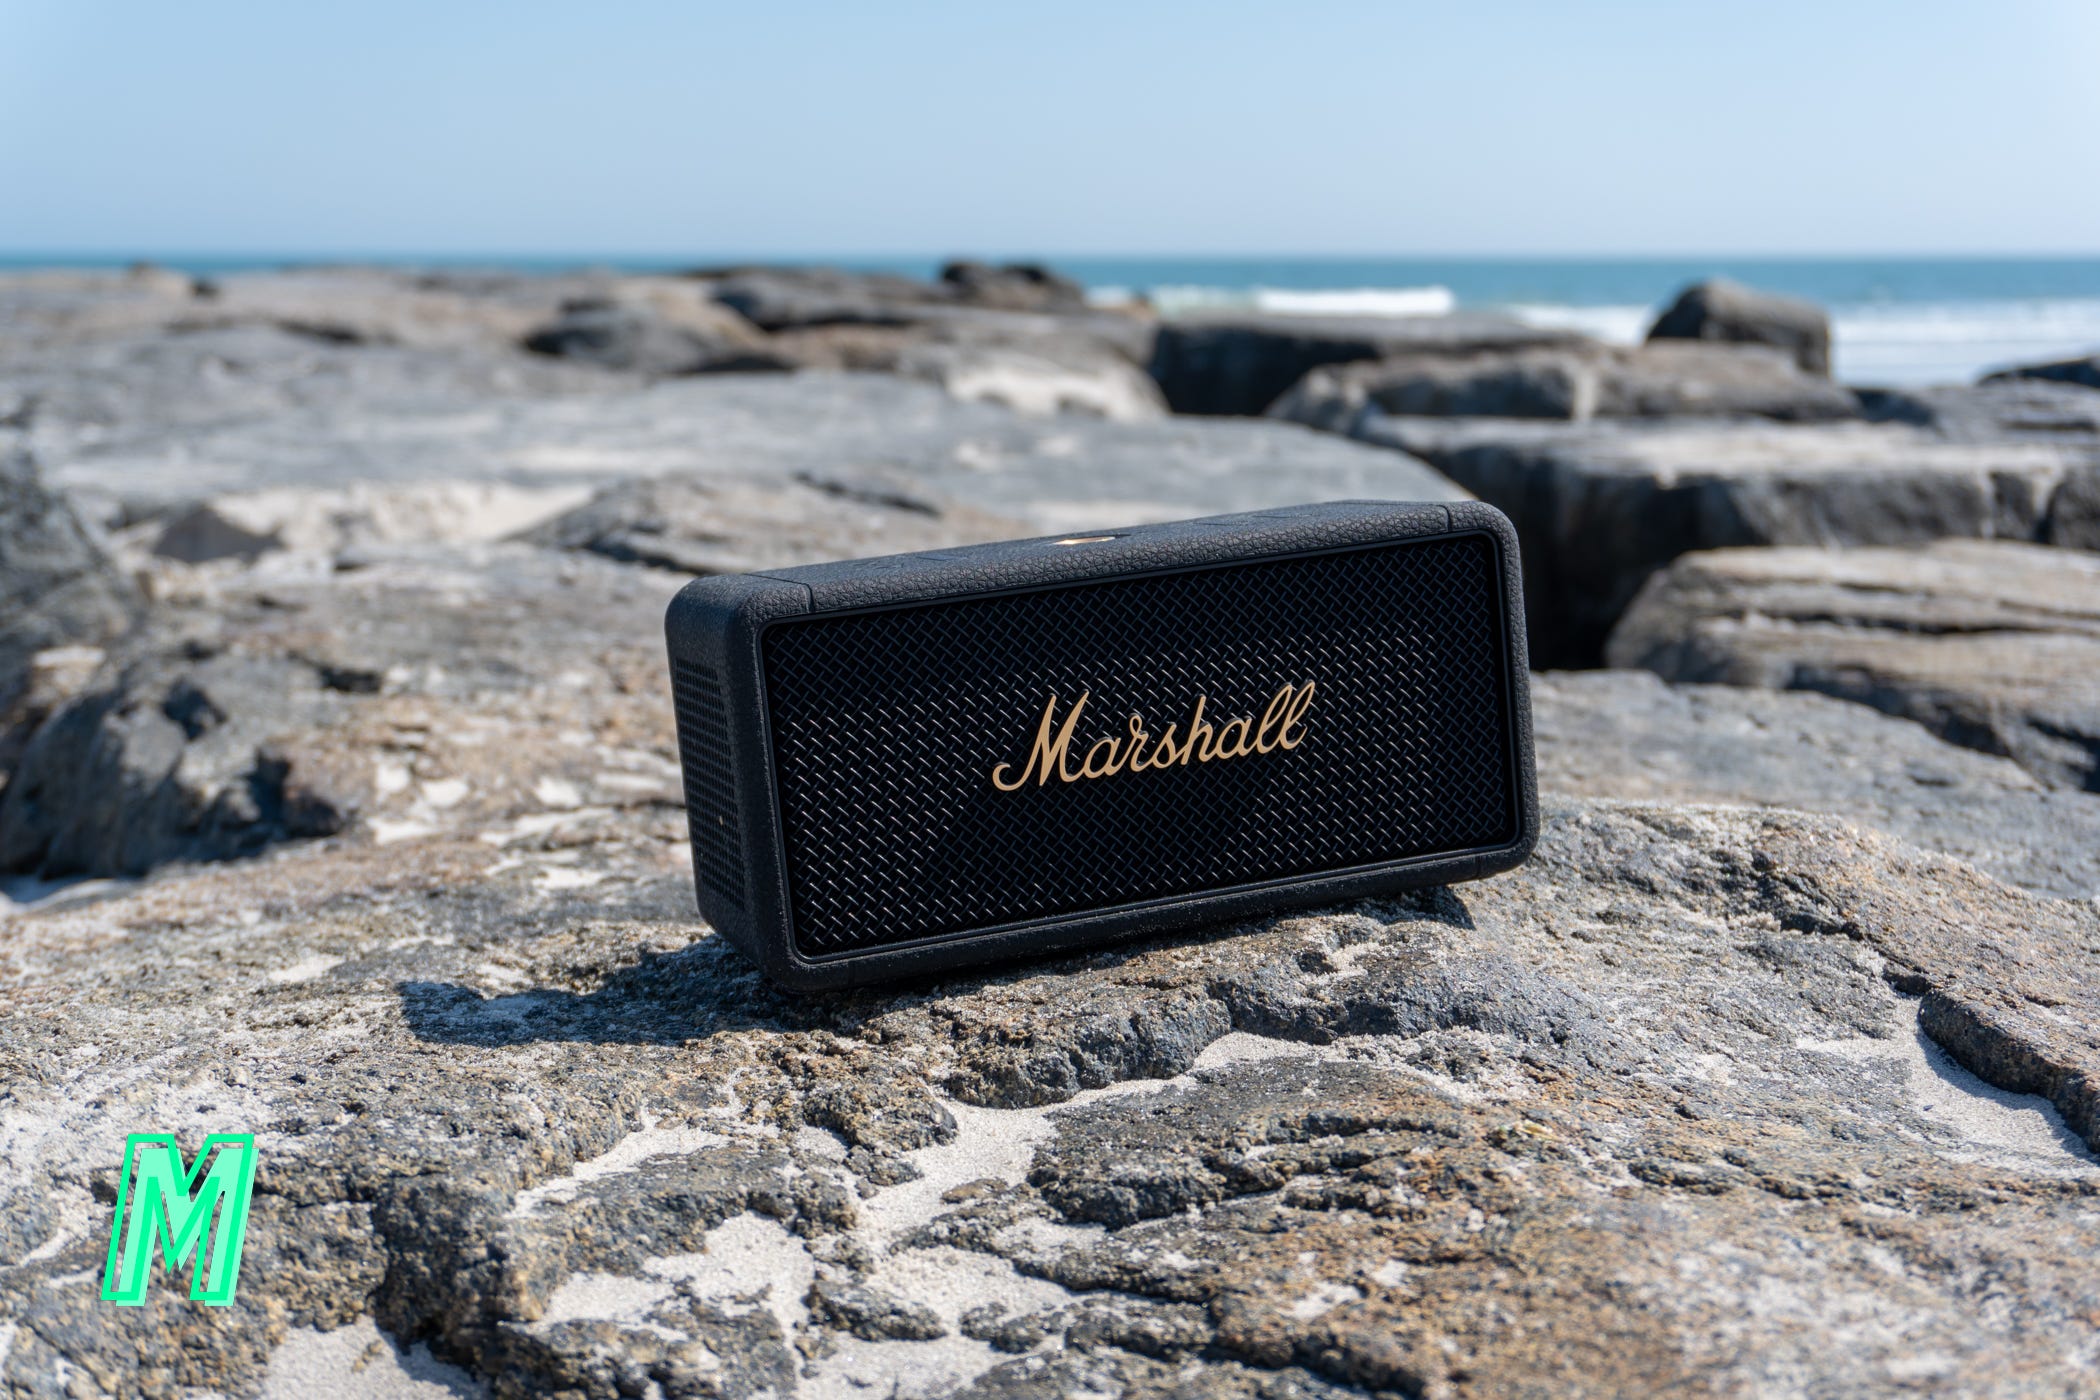 a design sound Middleton Premium review: in Marshall durable